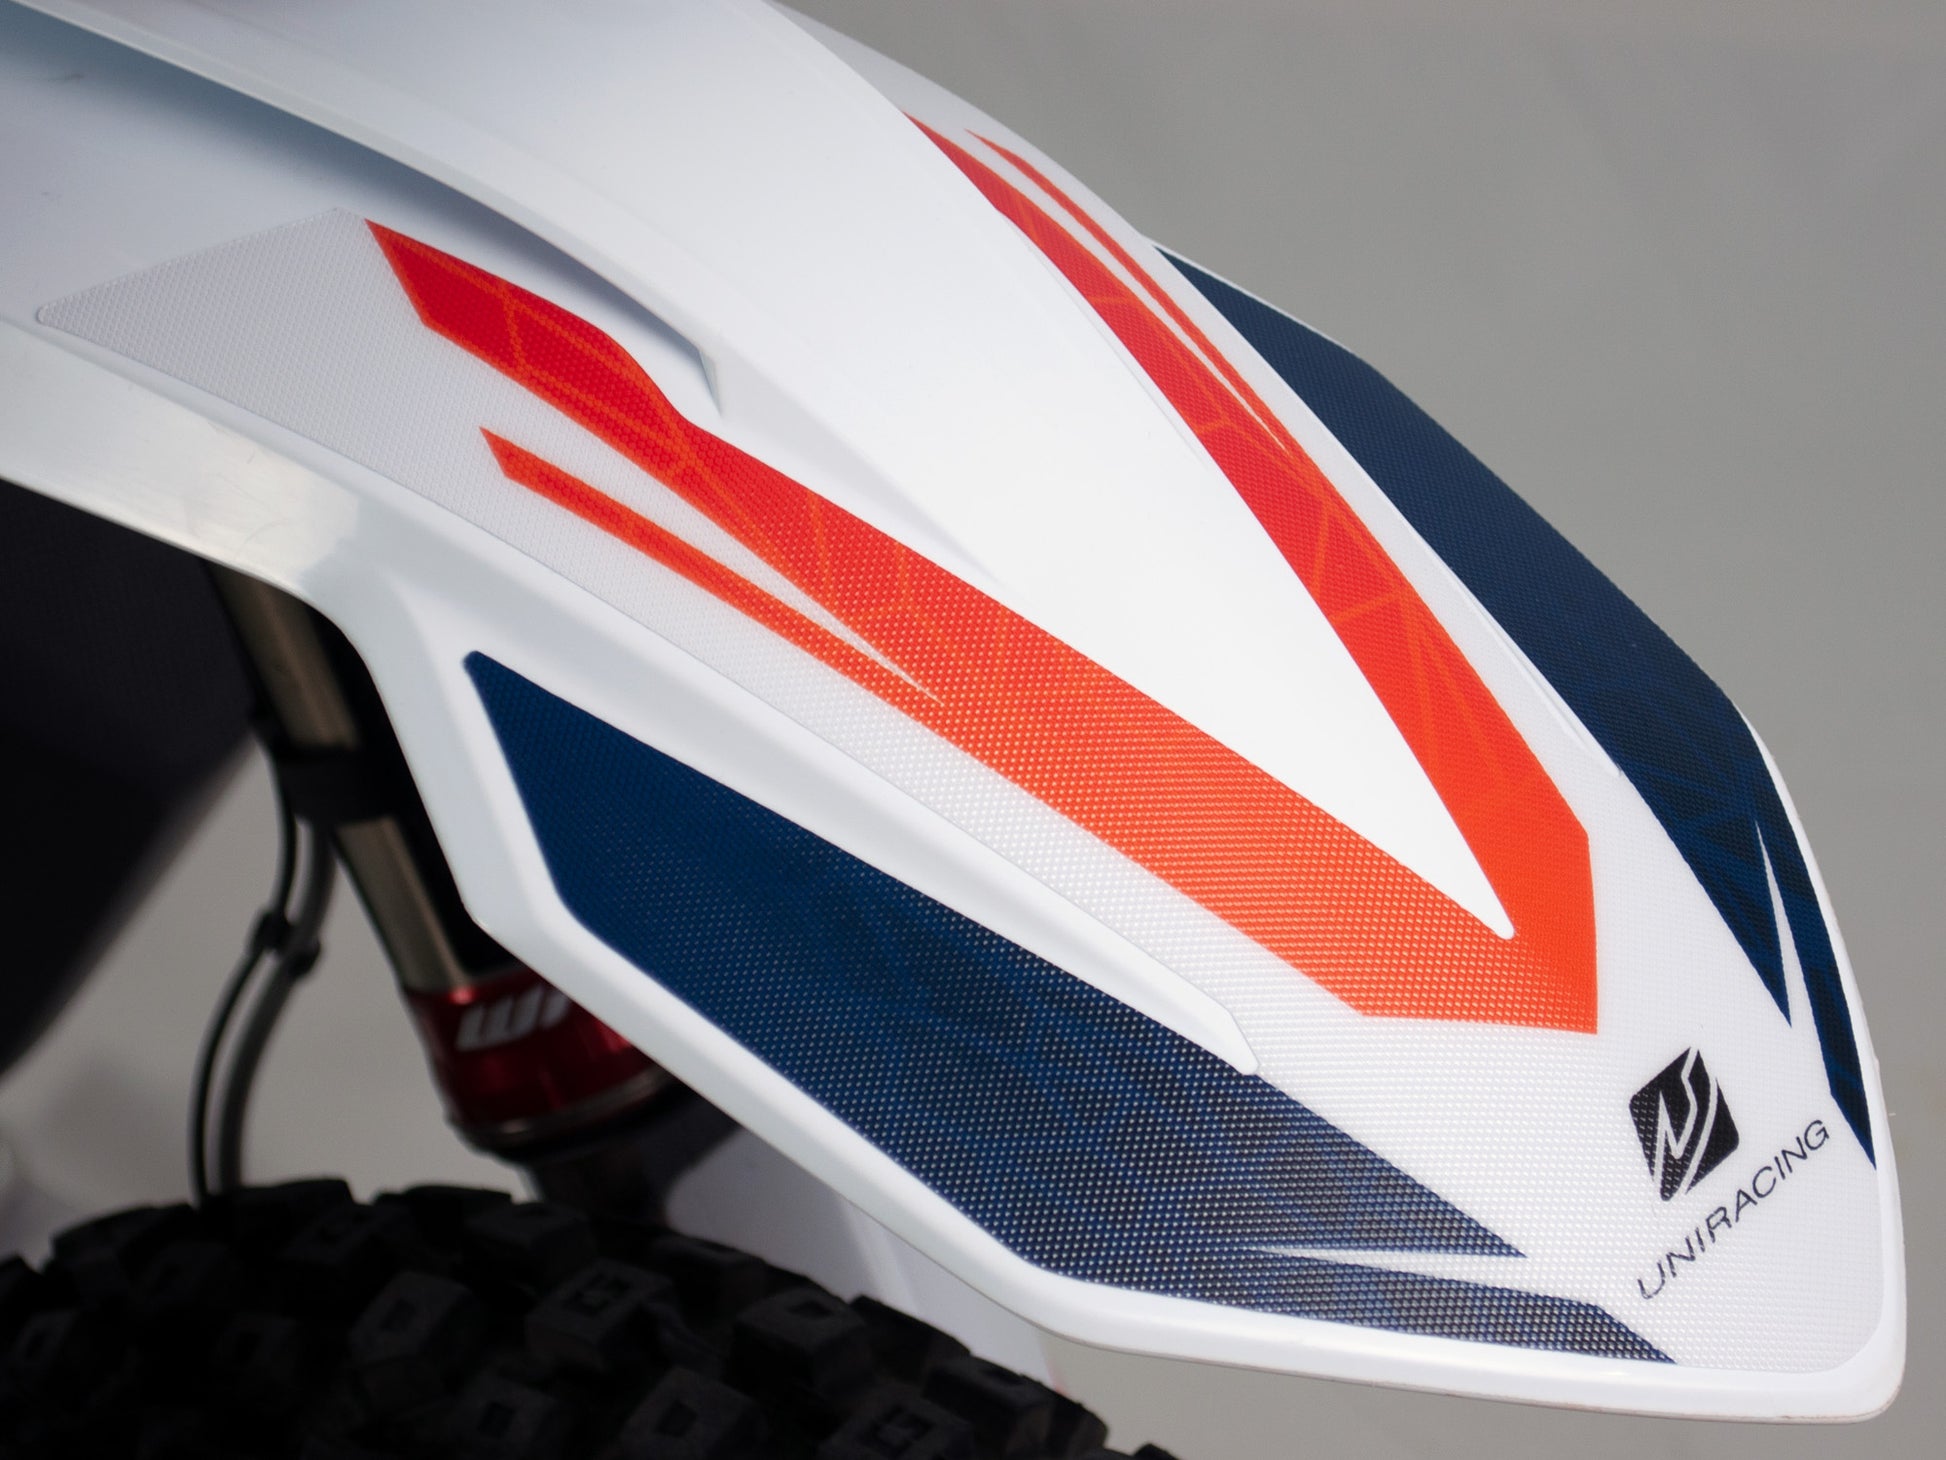 KTM 890 Adventure R Rally 2020-21 Decoration and Protection kit - Uniracing